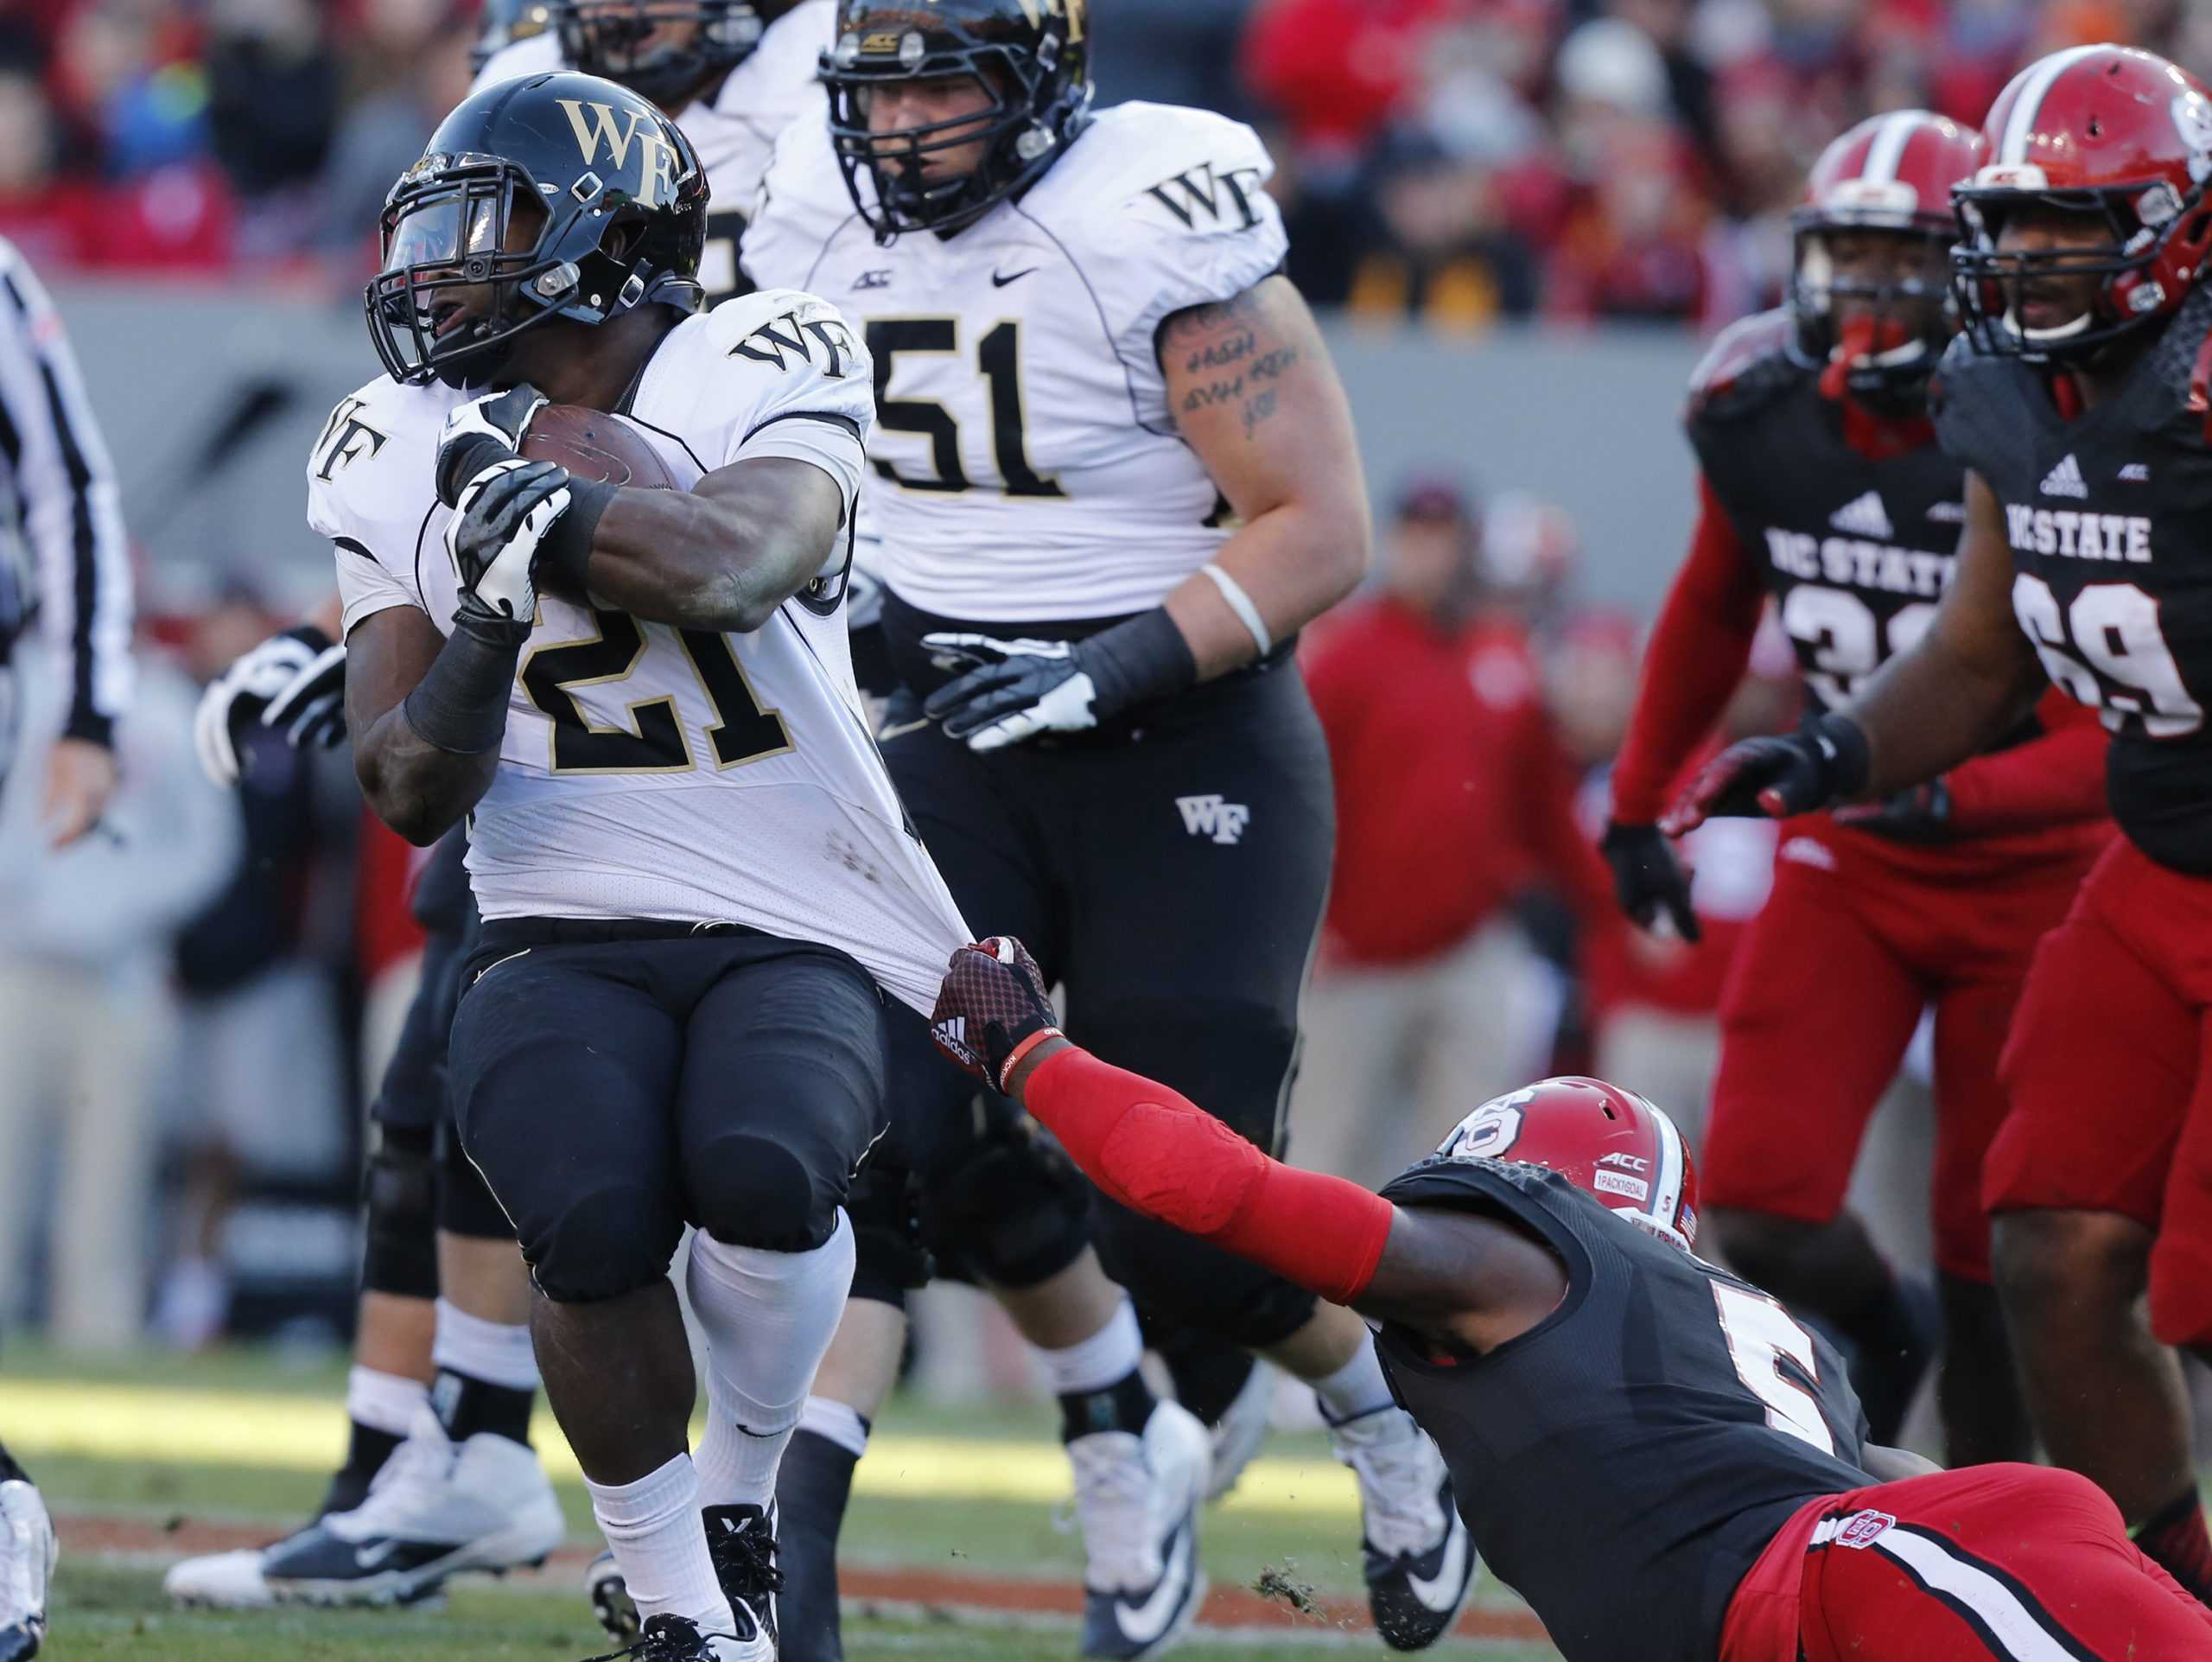 Will the Deacs improve in 2015?